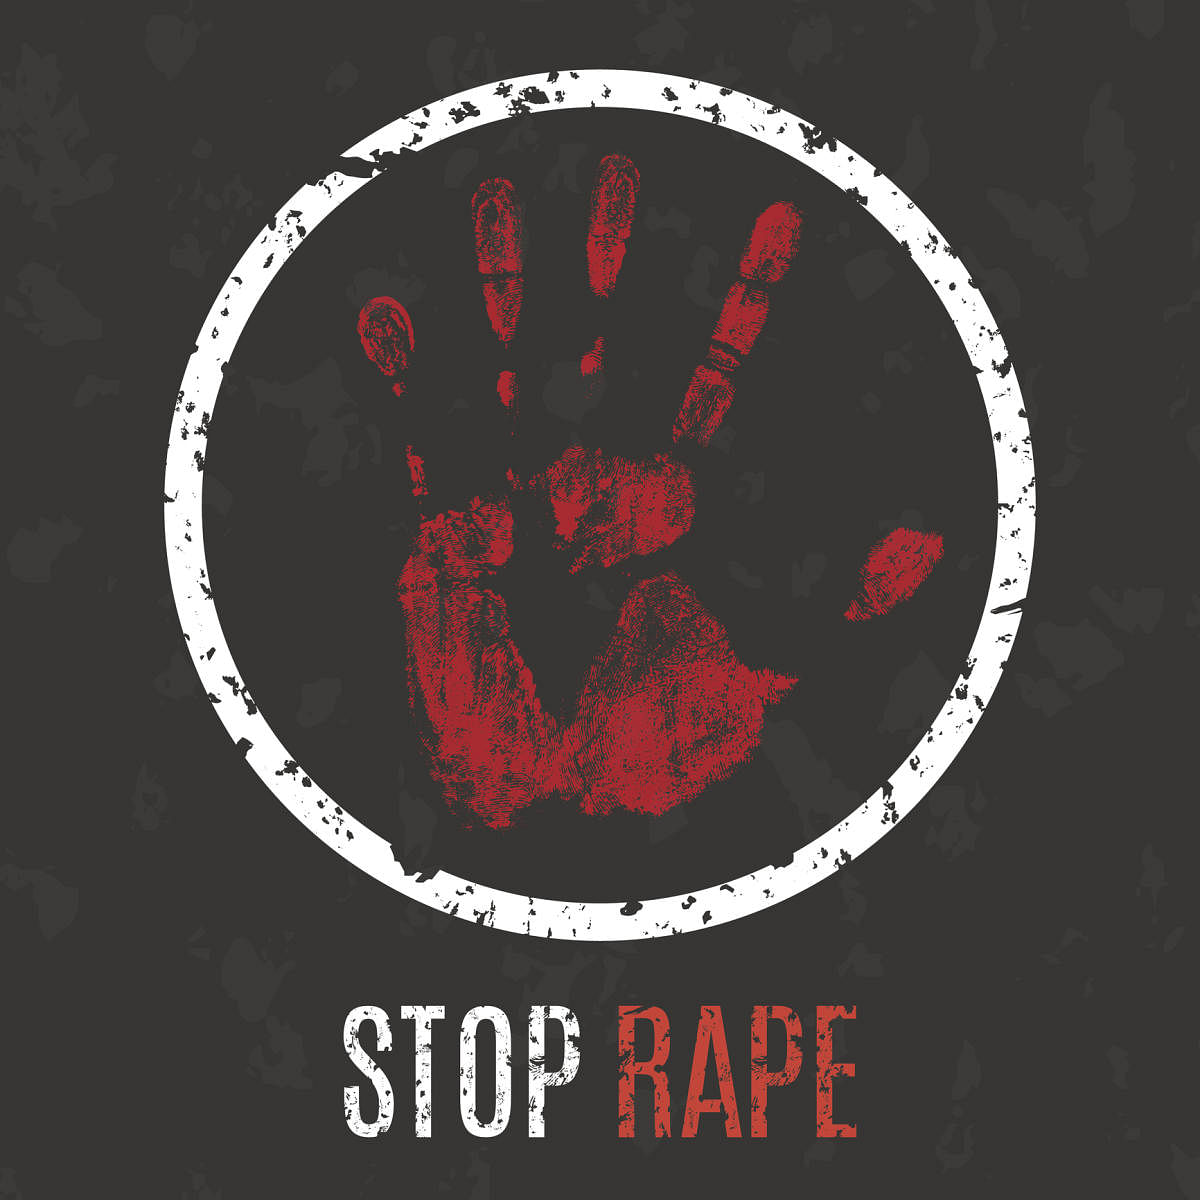 A 17-year-old nursing student was reportedly gang-raped by two persons at a government hospital in Uttar Pradesh's Baghpat district.